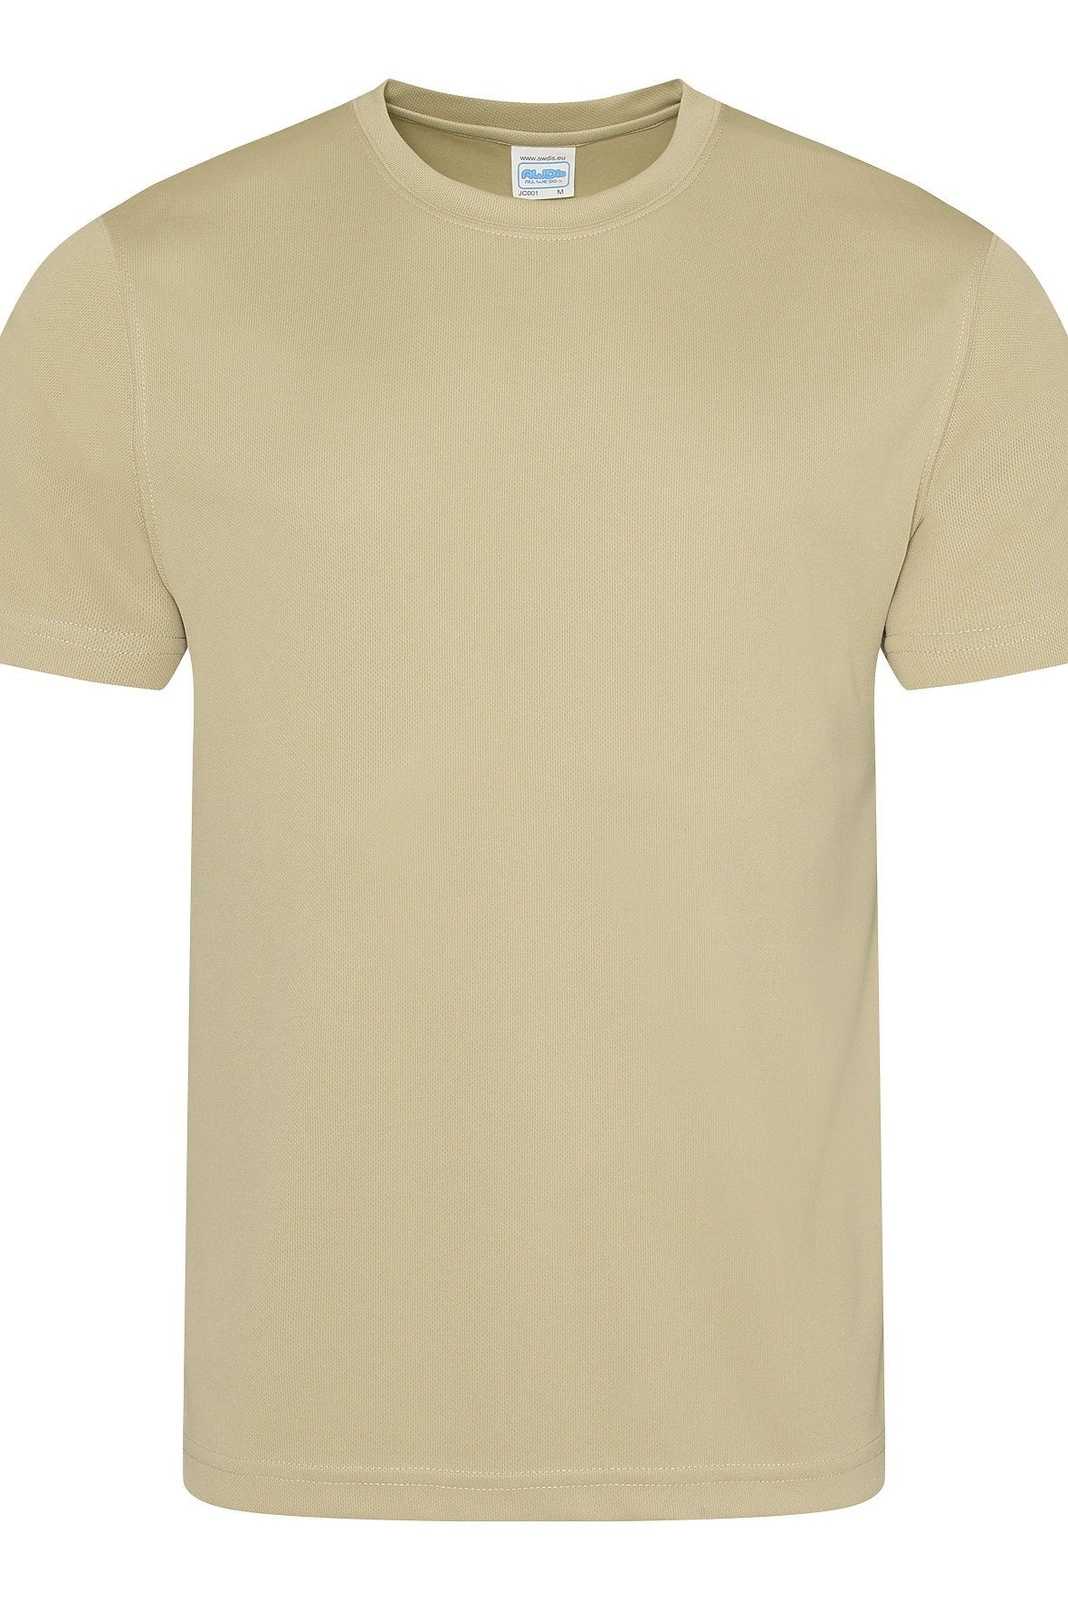 Just Cool JCA001 Cool Tee - Desert Sand - HIT a Double